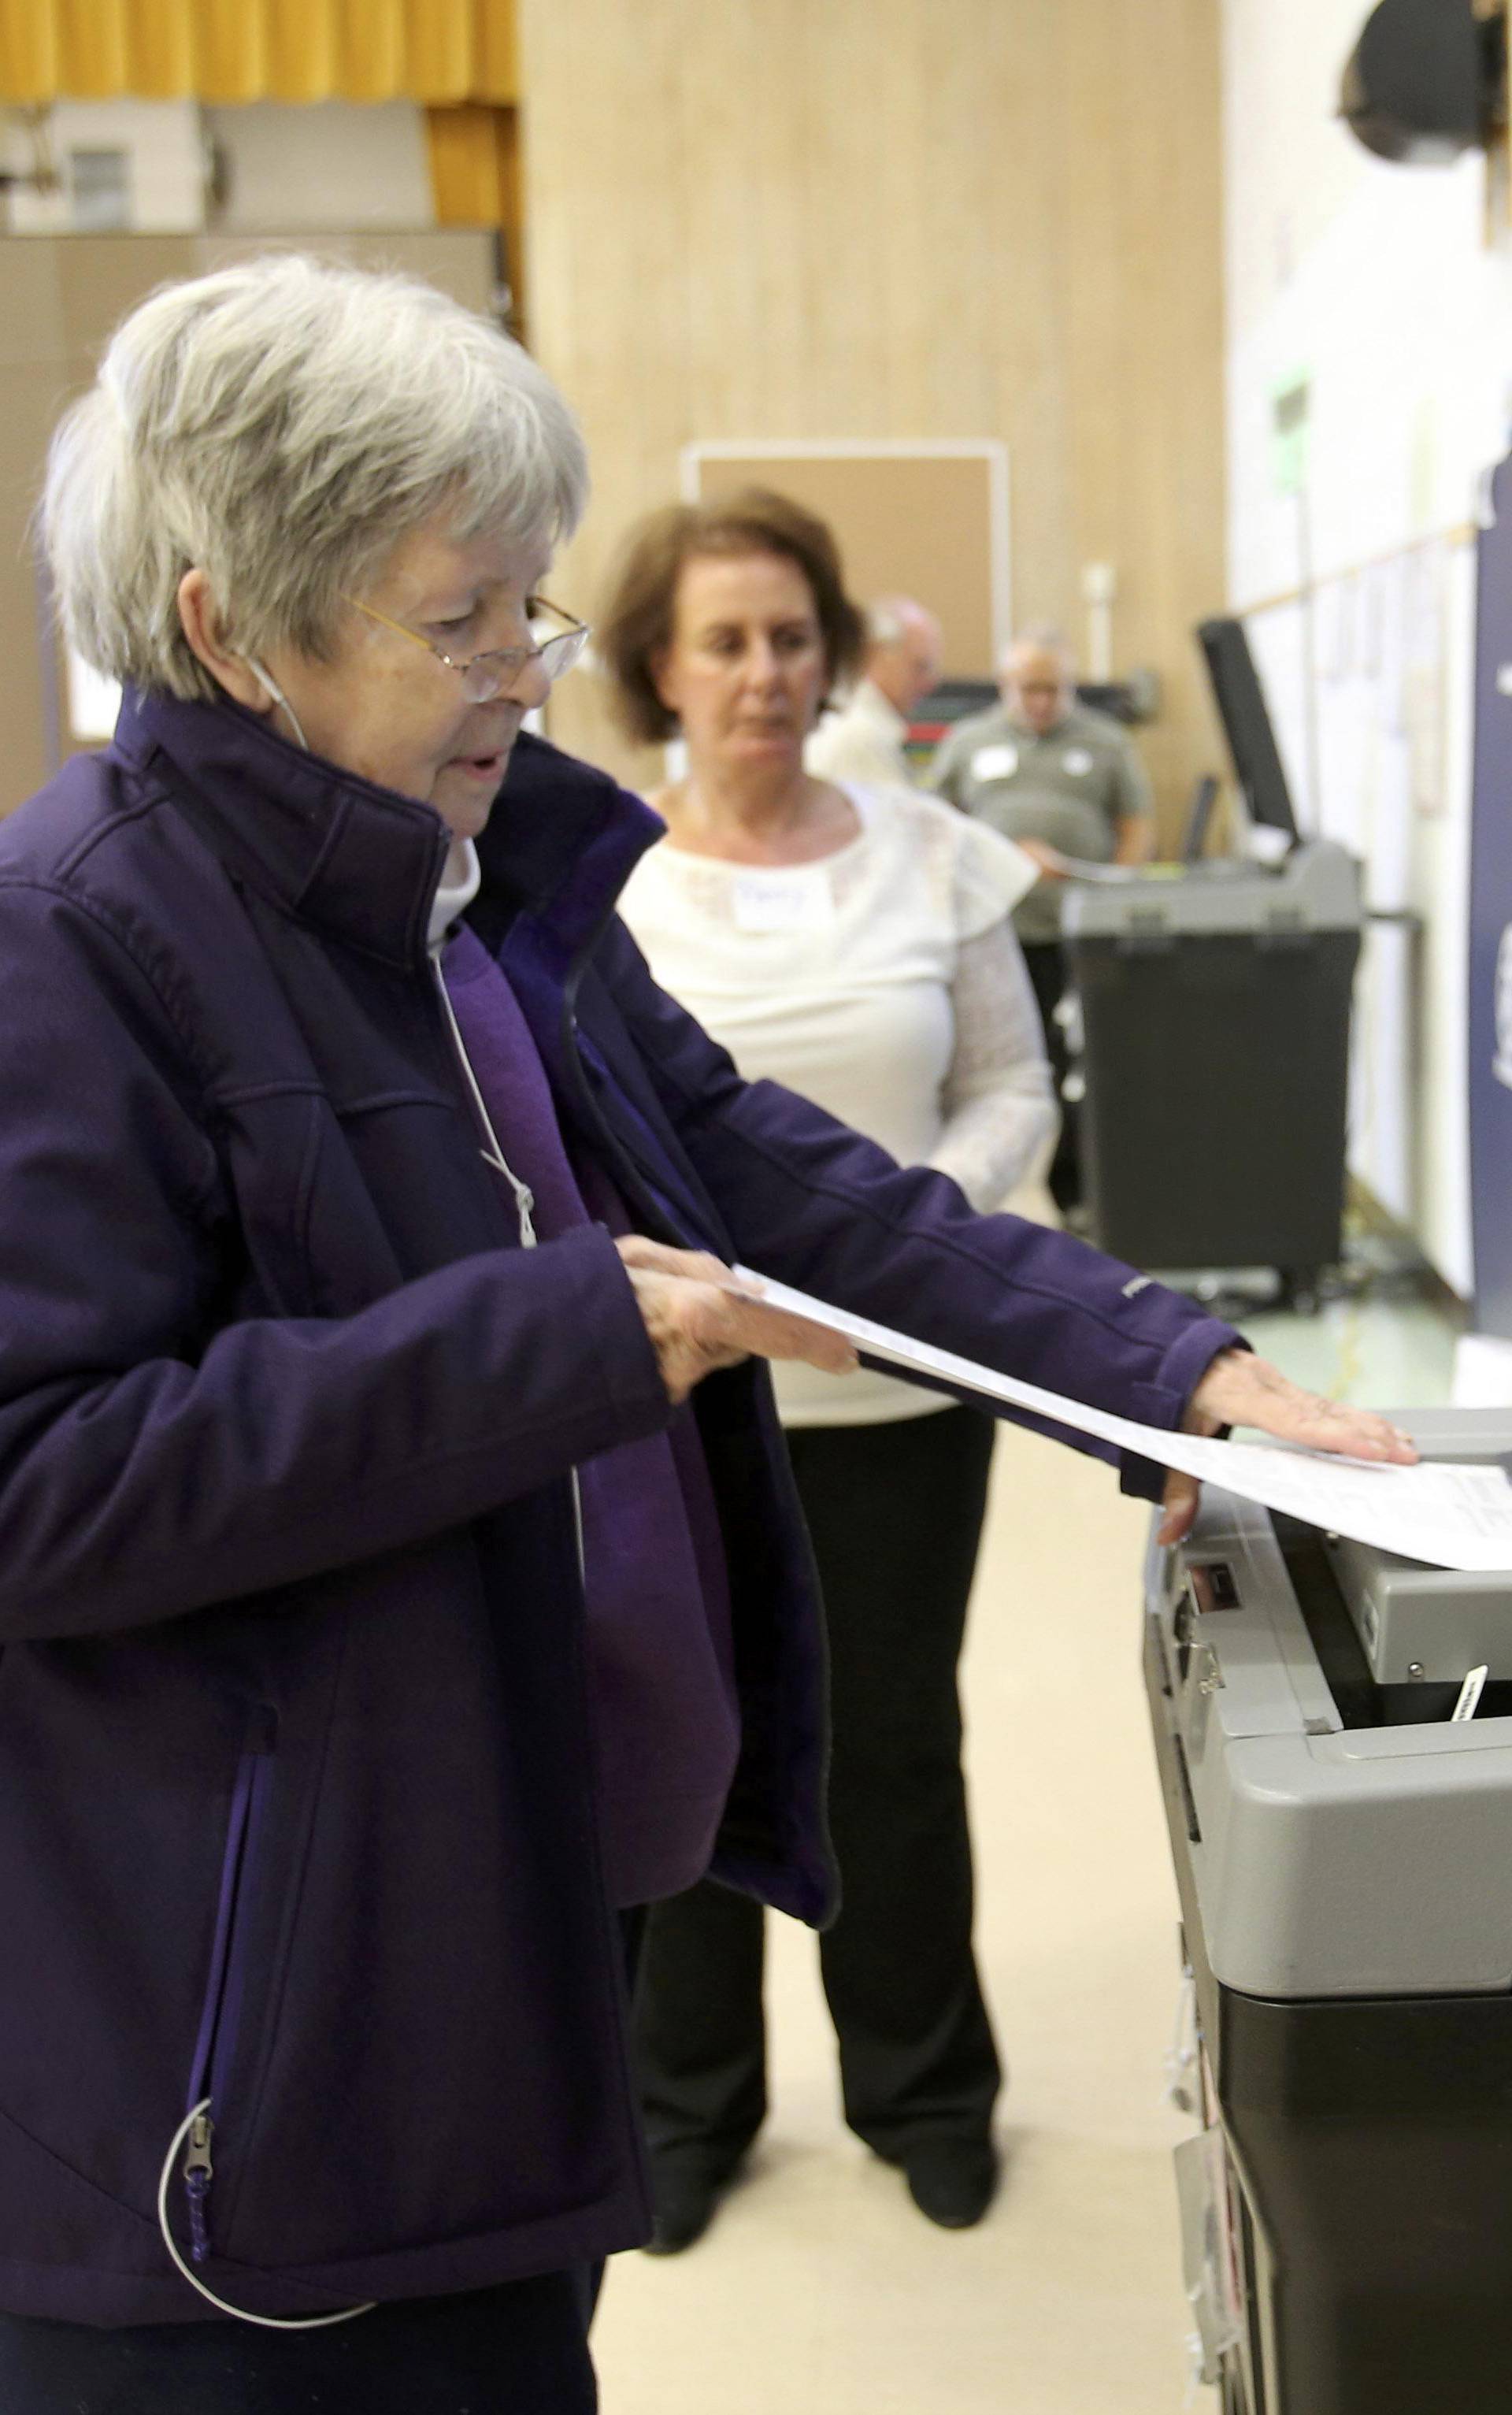 Susan Novak scans her ballots after voting during the U.S. presidential election in Ohio